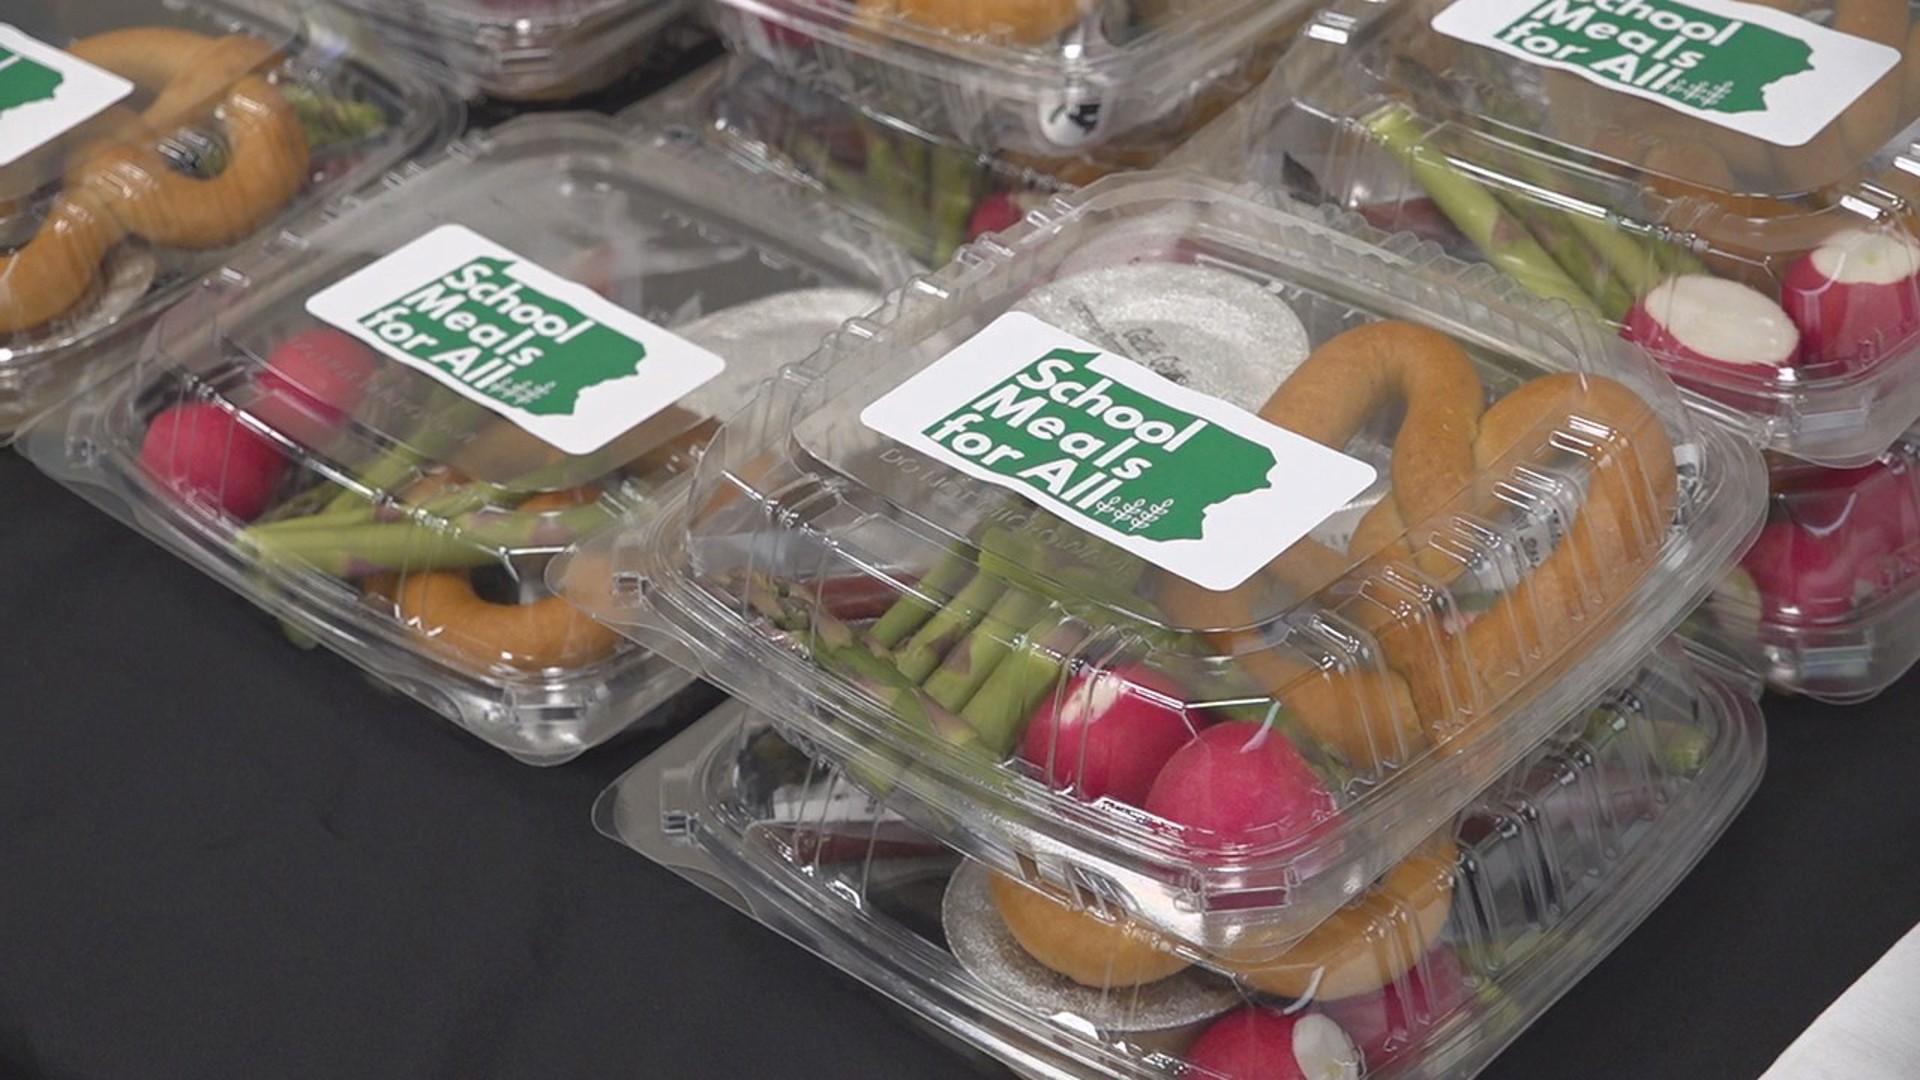 Parents, school officials and nutritionists at the Pennsylvania State Capitol want to remove one aspect of the school day, saying no student should pay for lunch.